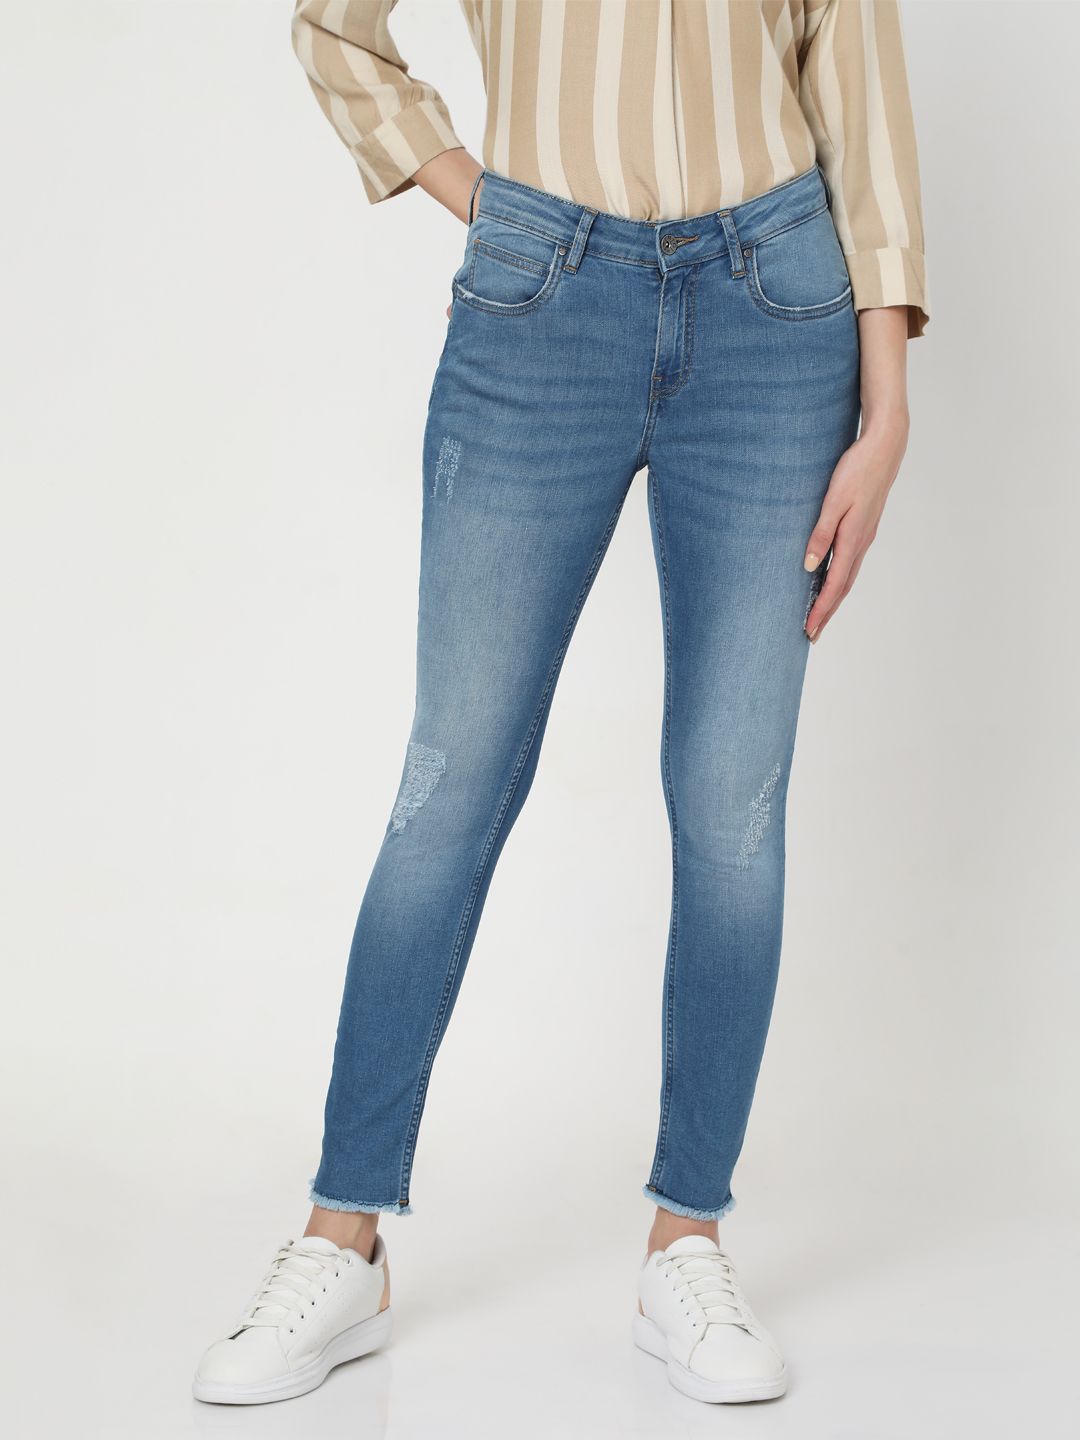 Vero Moda Women Blue Skinny Fit Highly Distressed Light Fade Mid-Rise Stretchable Jeans Price in India